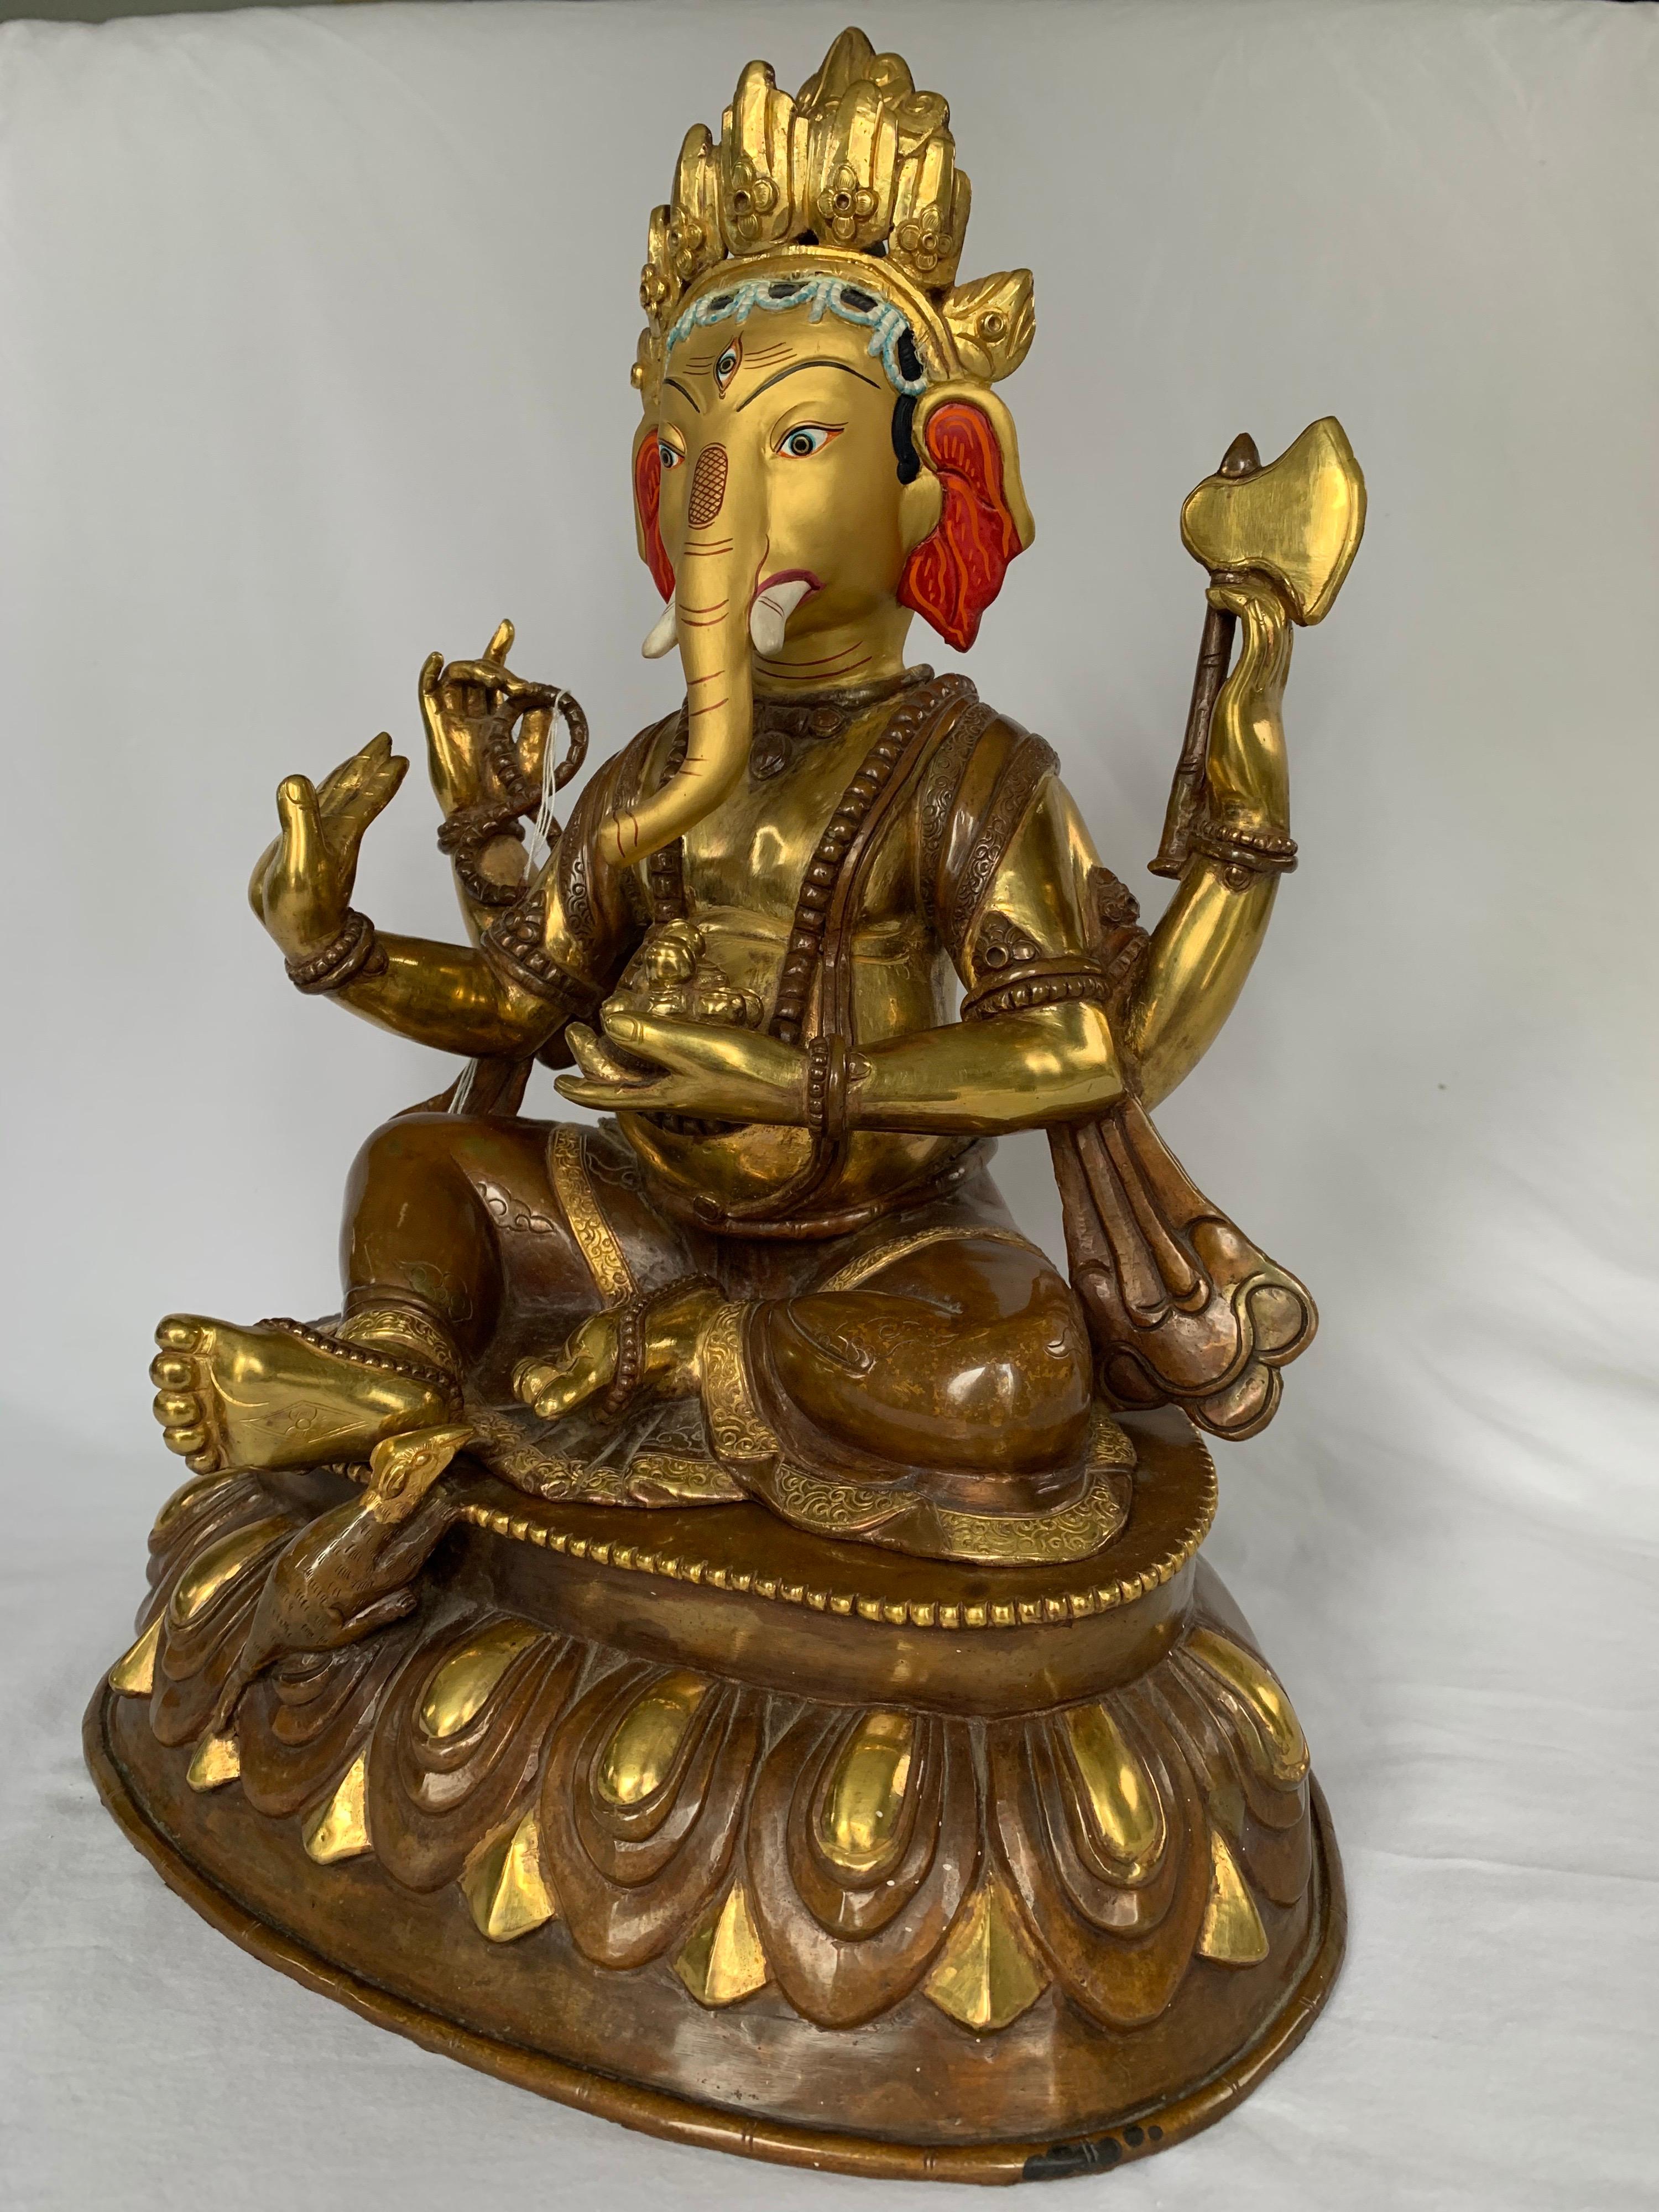  Ganesha Statue with 24 Carat Gold Handcrafted by Lost Wax Process - Sculpture by Unknown